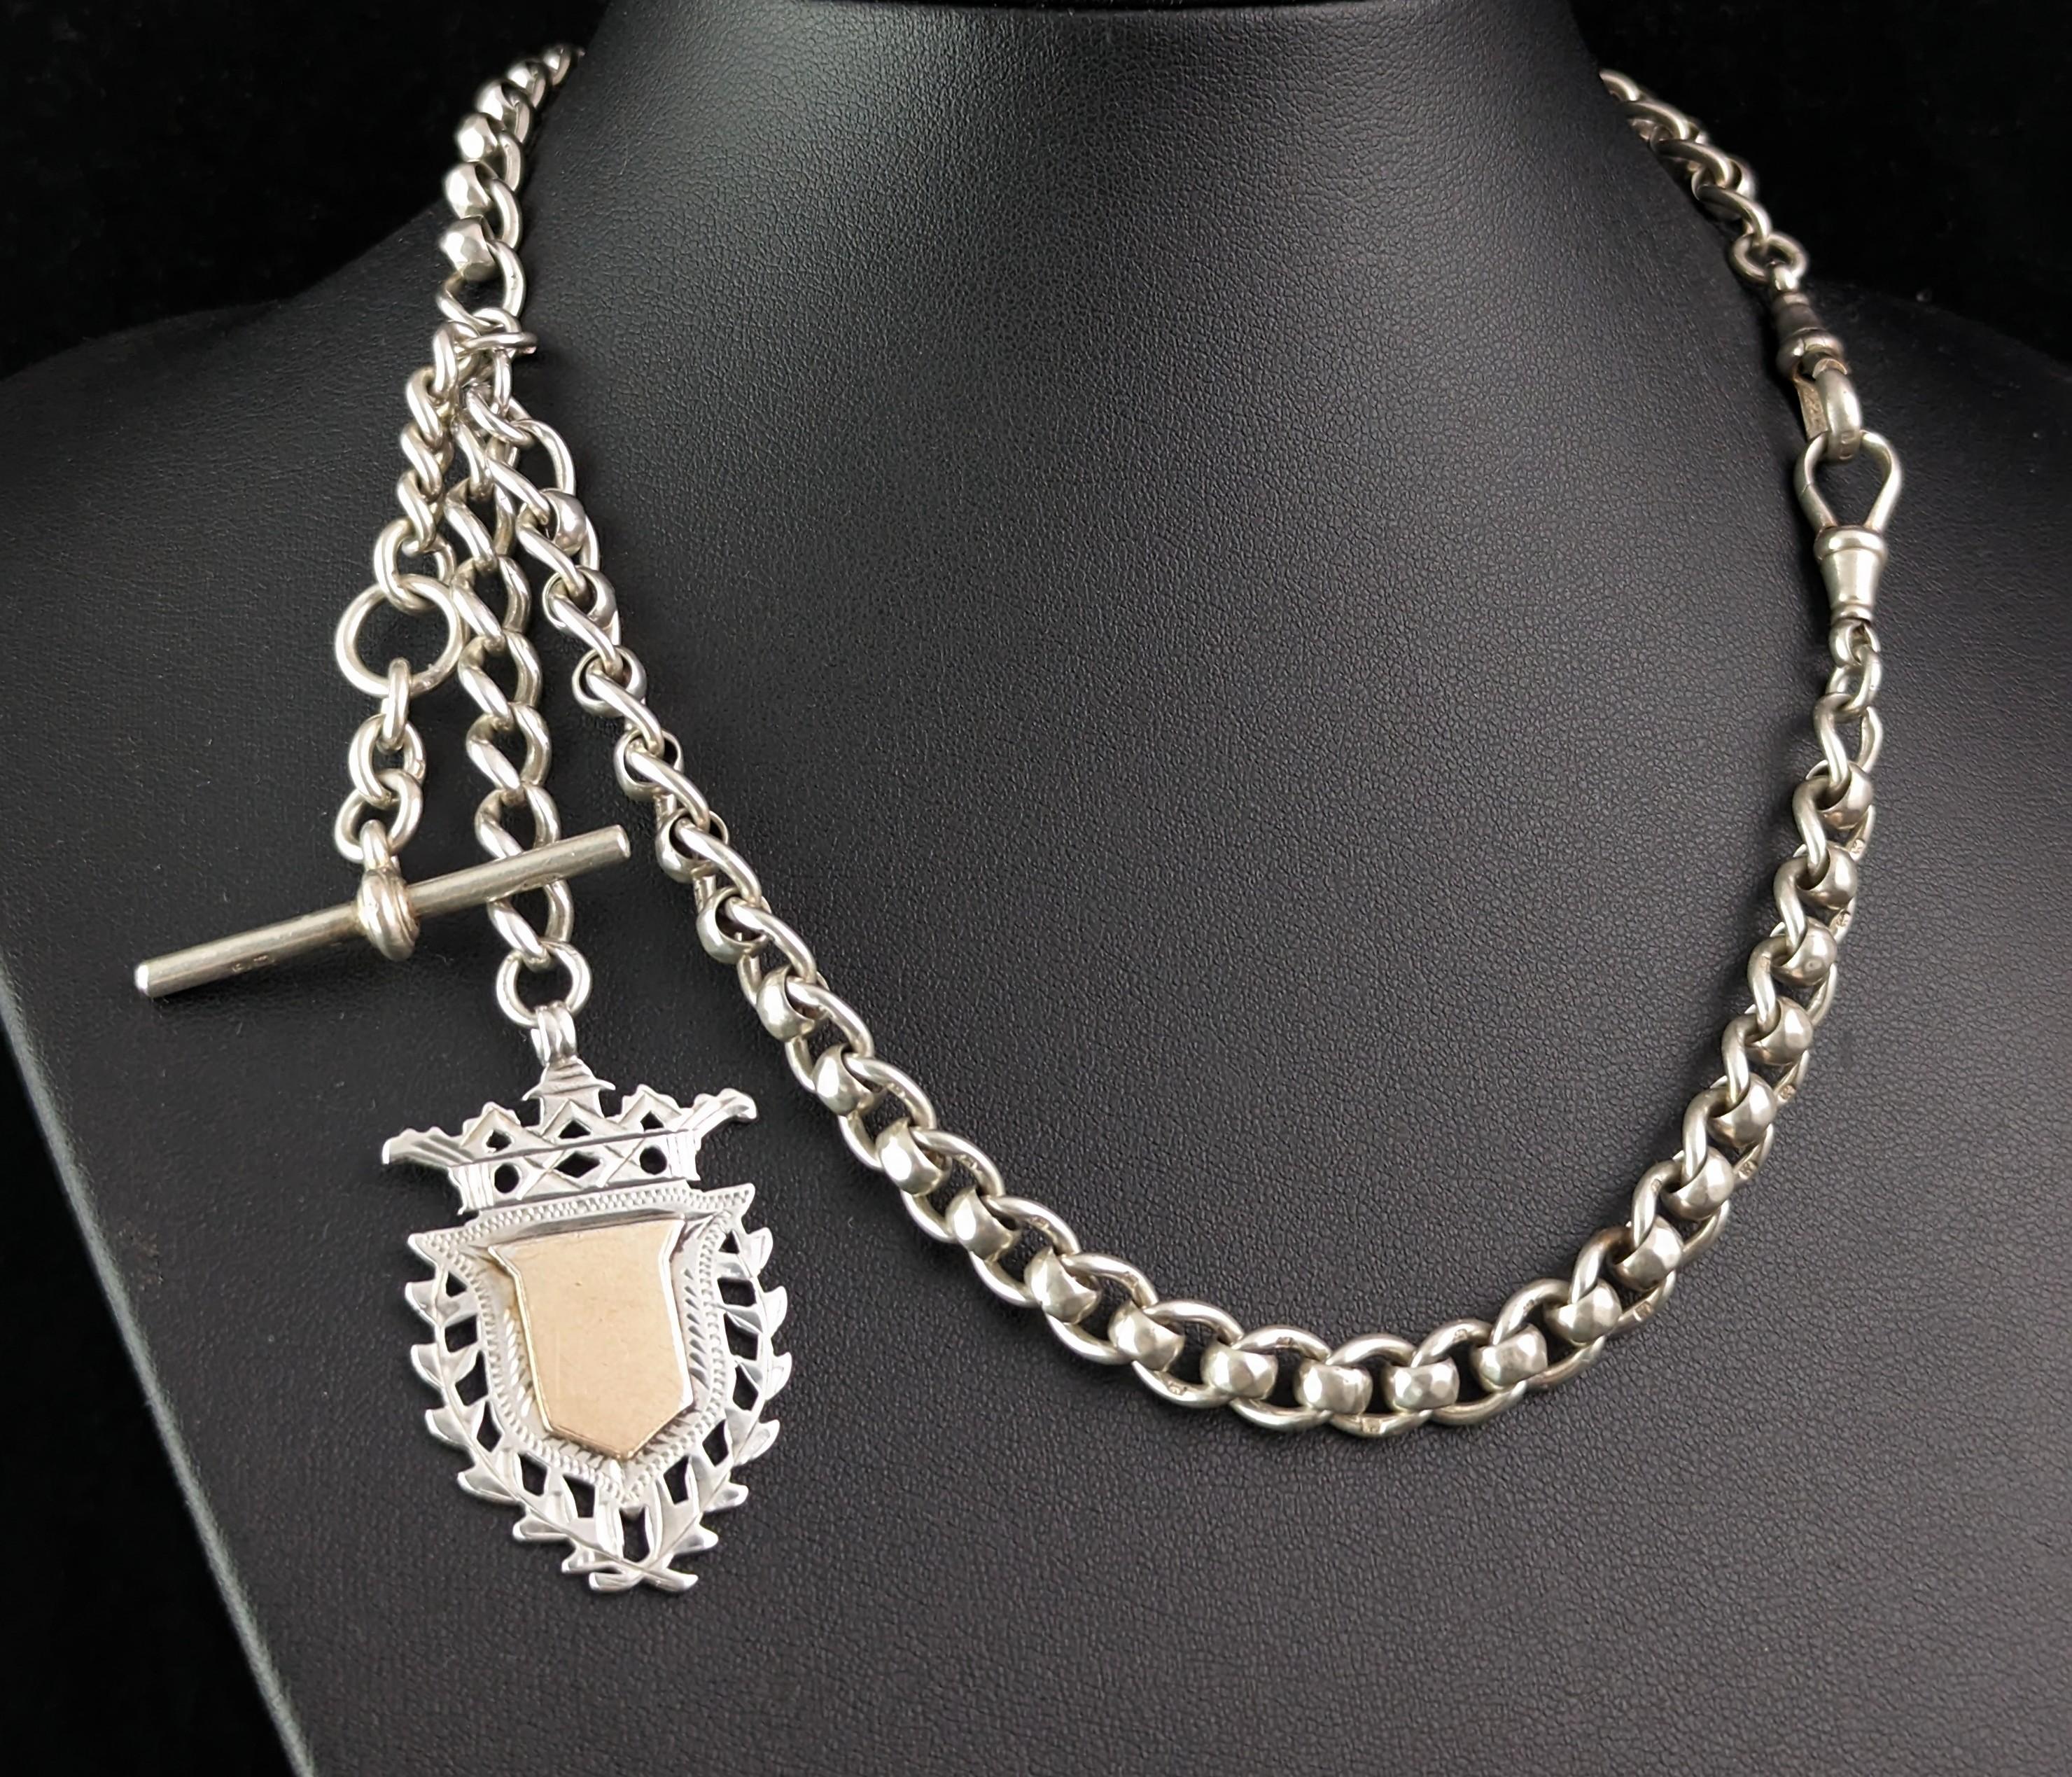 You can't help but fall in love with this handsome antique sterling silver Albert chain.

It features a fancy link chain with interlocking rolo and open curb links, a substantial chain, it features a gorgeous sterling silver shield shaped fob which